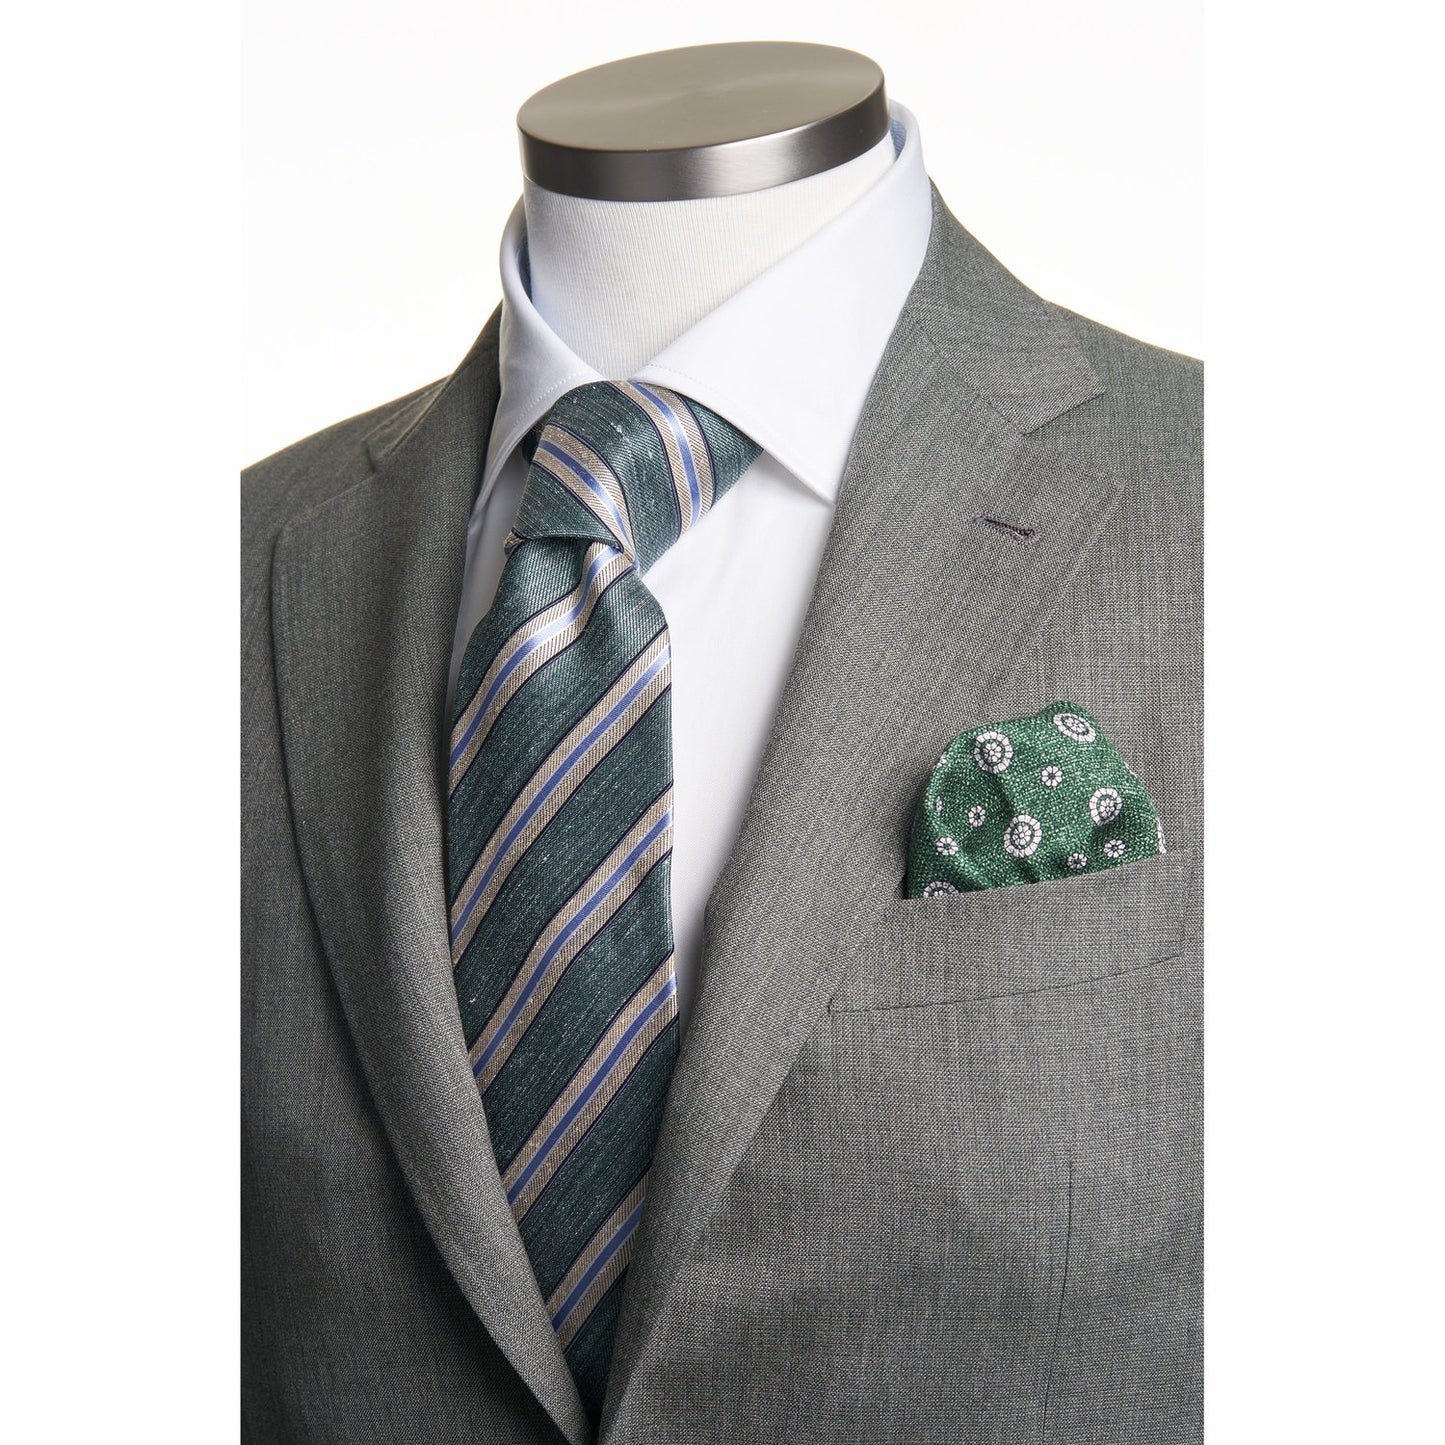 Canali Kei Model 100% Wool Suit in Olive Green